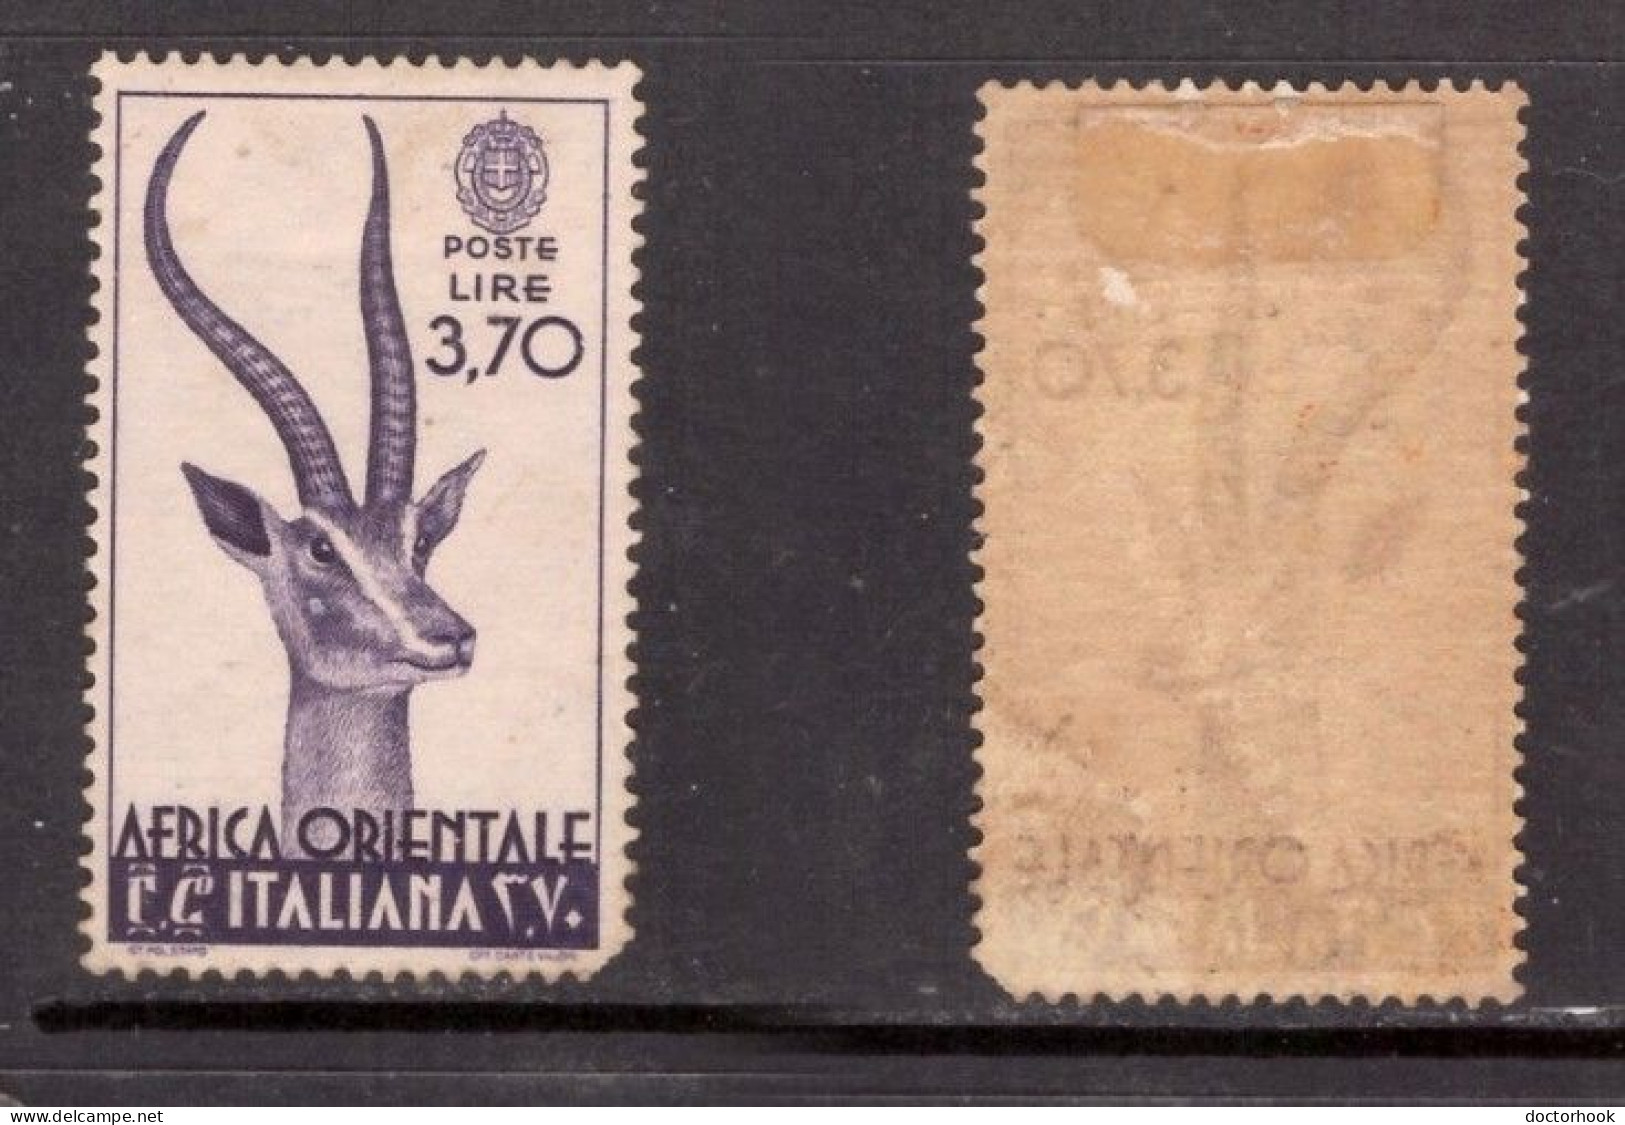 ITALIAN EAST AFRICA   Scott # 17* MINT HINGED (CONDITION AS PER SCAN) (Stamp Scan # 957-1) - Africa Orientale